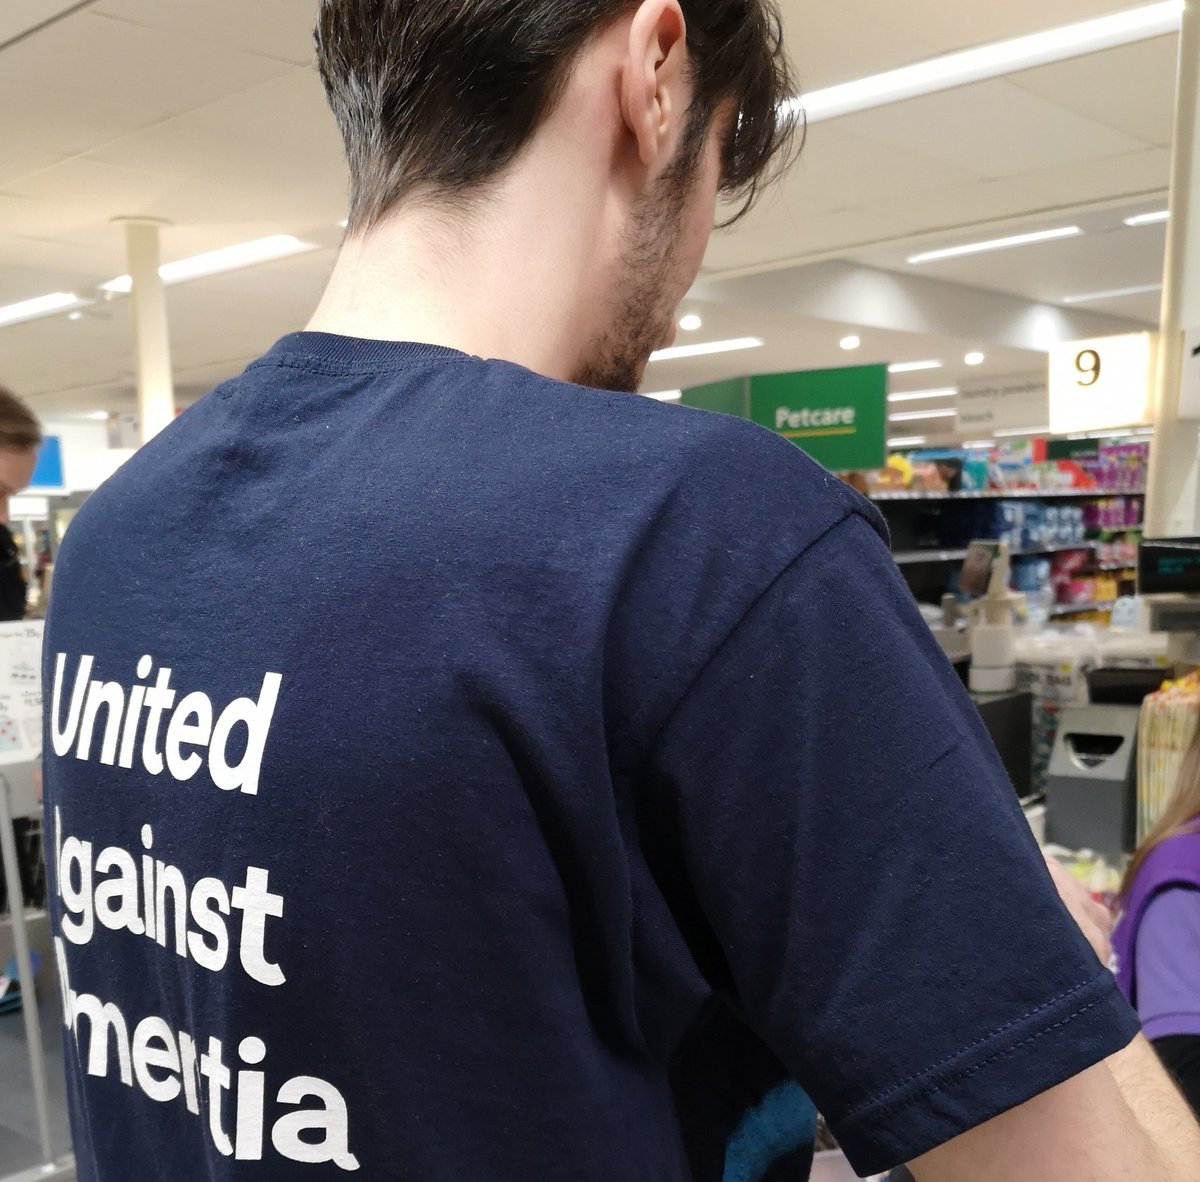 Thank you to everyone who chatted to us yesterday! Huge thank you to Morrisons for allowing us to collect too!
Help to #FixDementiaCare here:alzheimers.org.uk/get-involved/o…

Our next event is Flashback on Friday! @alzheimerssoc @AlzSocEMidlands @lincolnSU